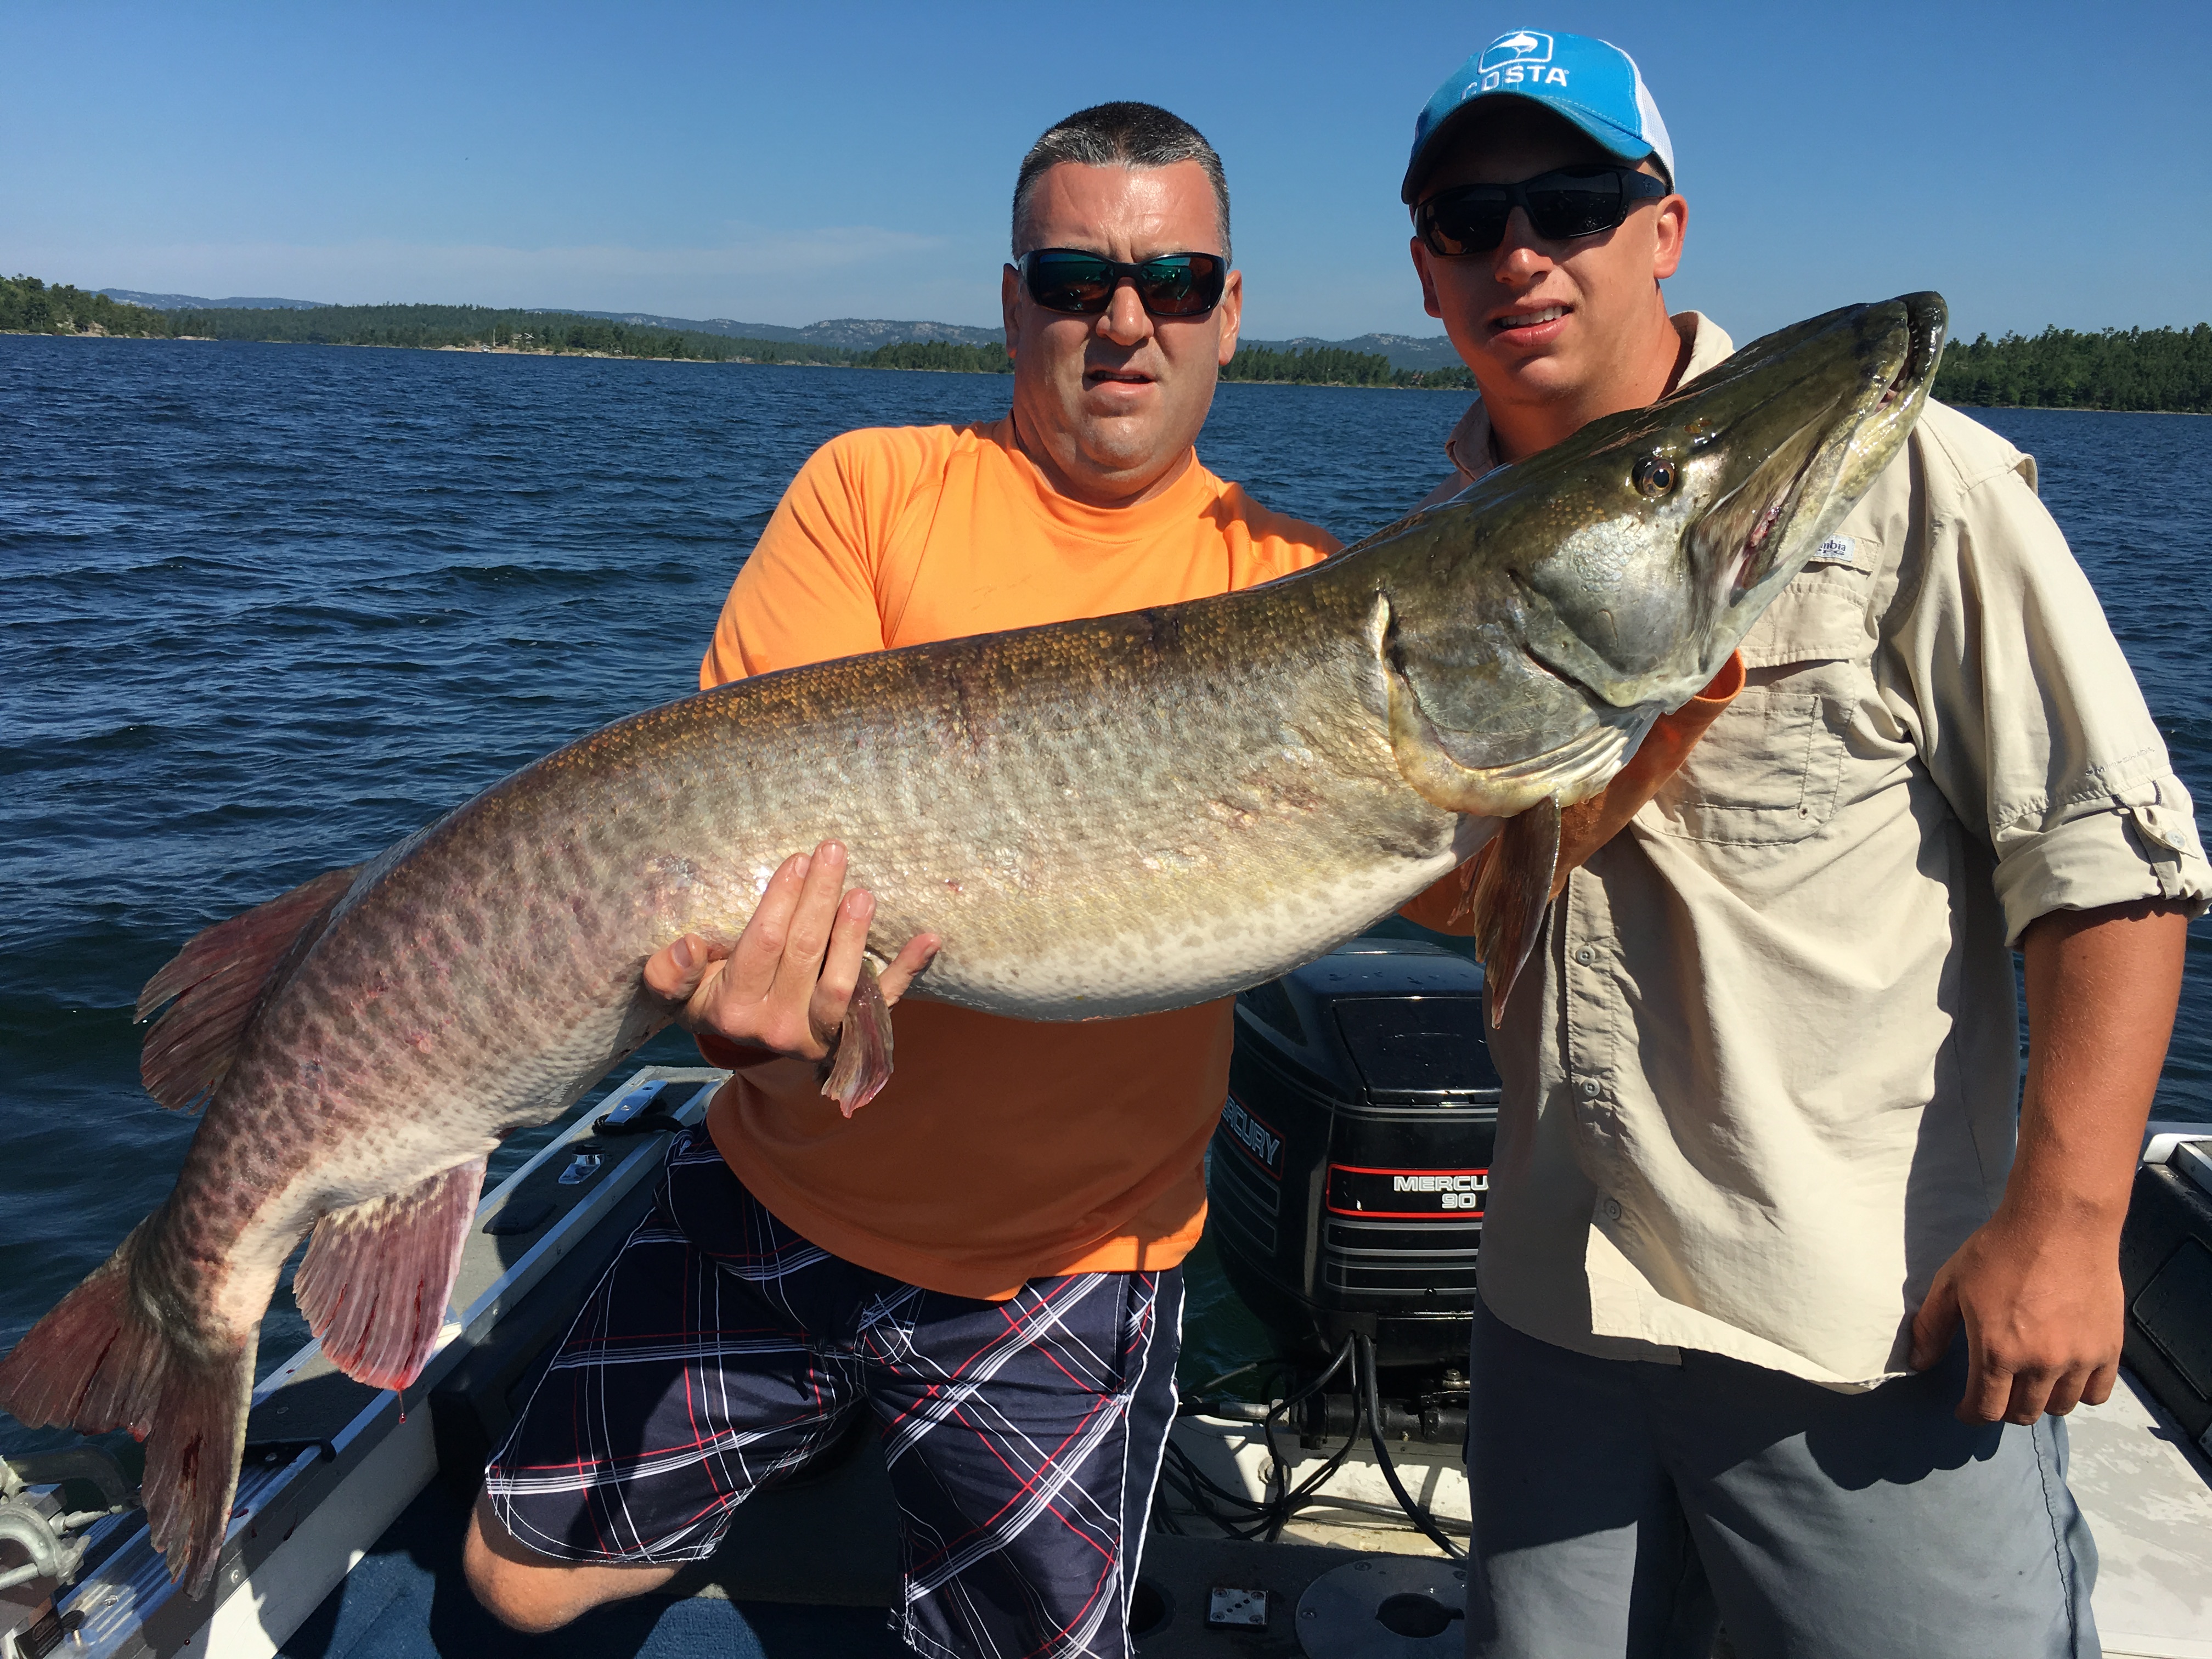 Orion Twp. residents Tim Berger (left) and Ethan Beckman pose with the 60-inch muskie they landed in Ontario, Canada's North Channel on July 26. Not pictured is Oxford resident Tom Berger, who was part of the team that landed this beast.